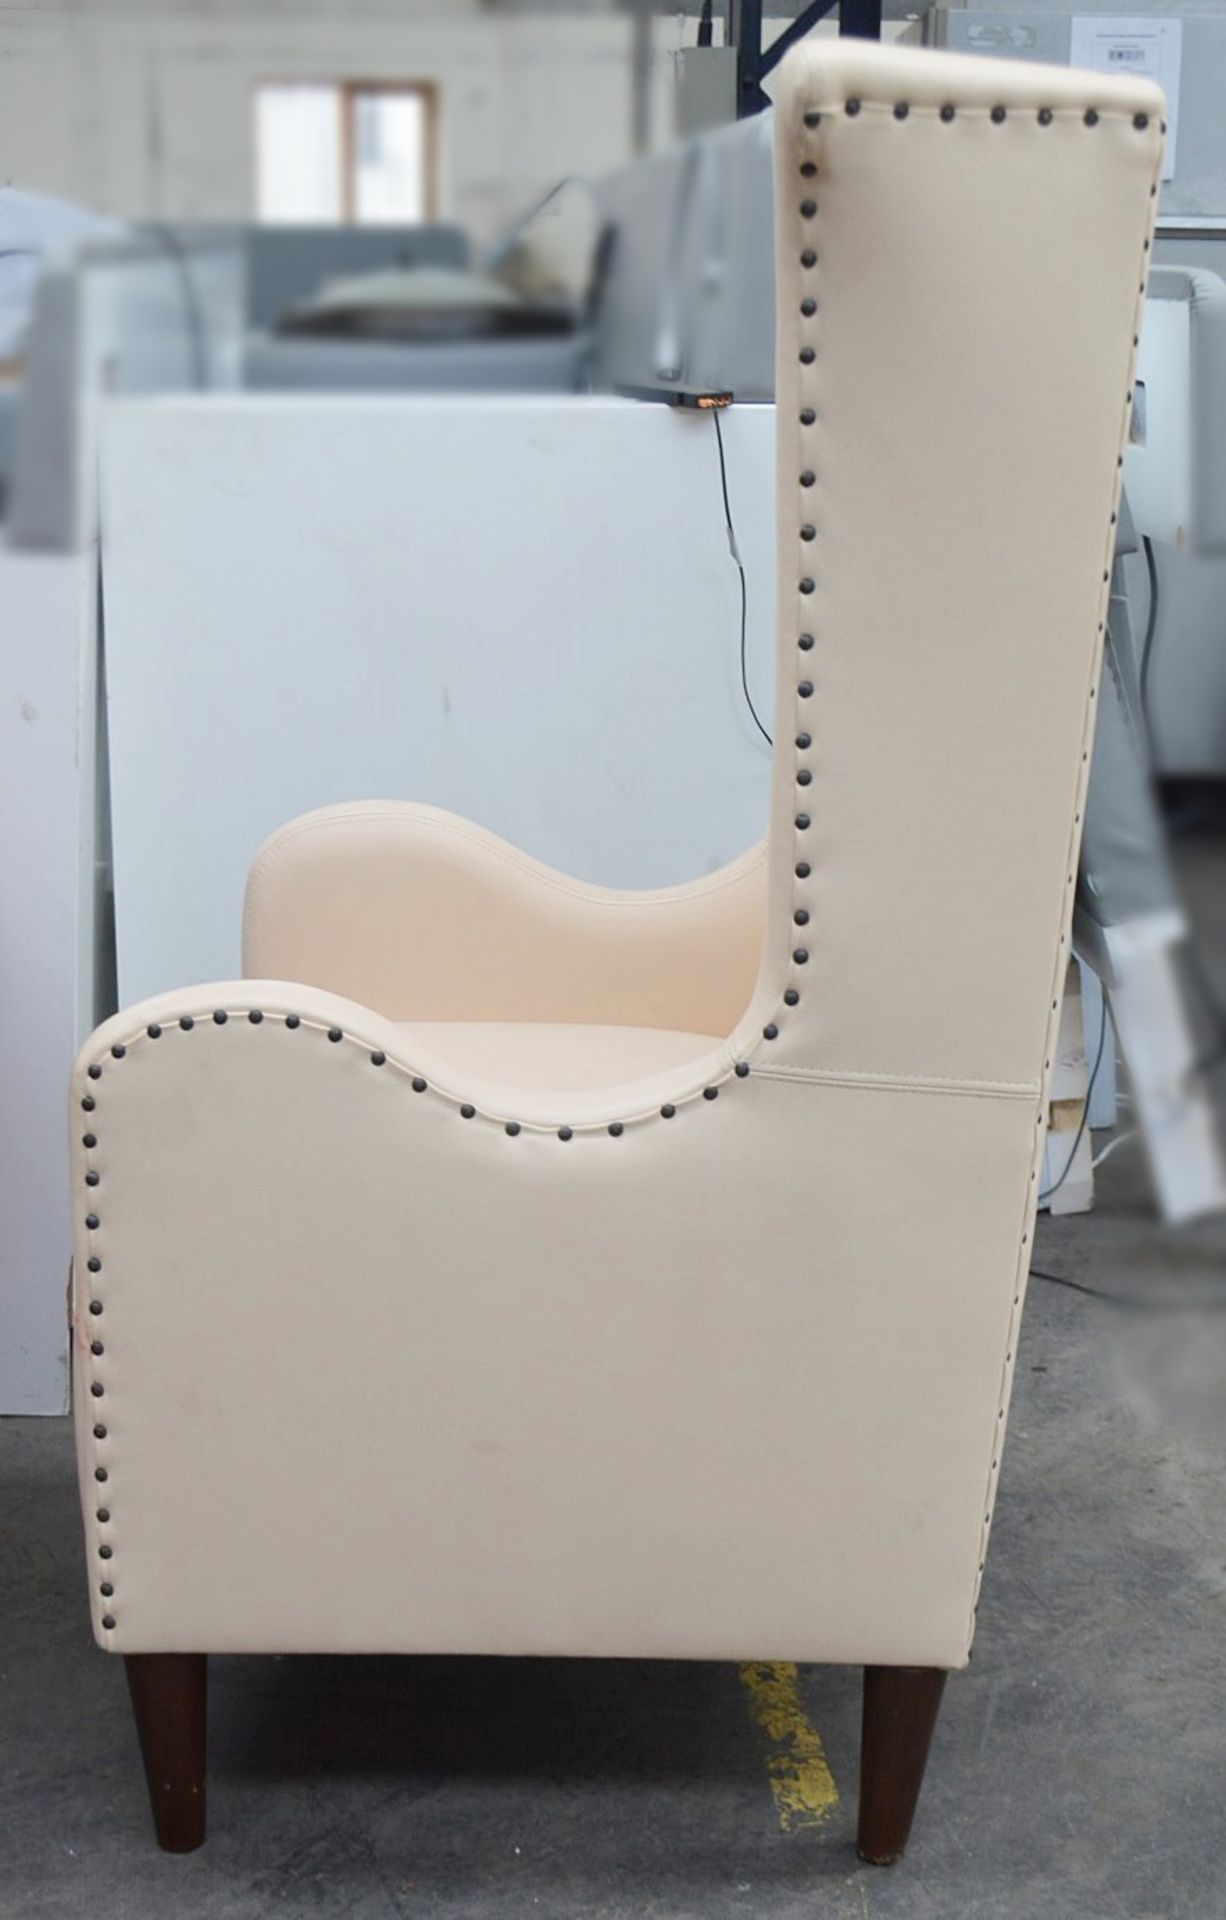 1 x Large Commercial Wing-Back Armchair In A Peach Leather With Studded Detailing - Professionally - Image 5 of 7